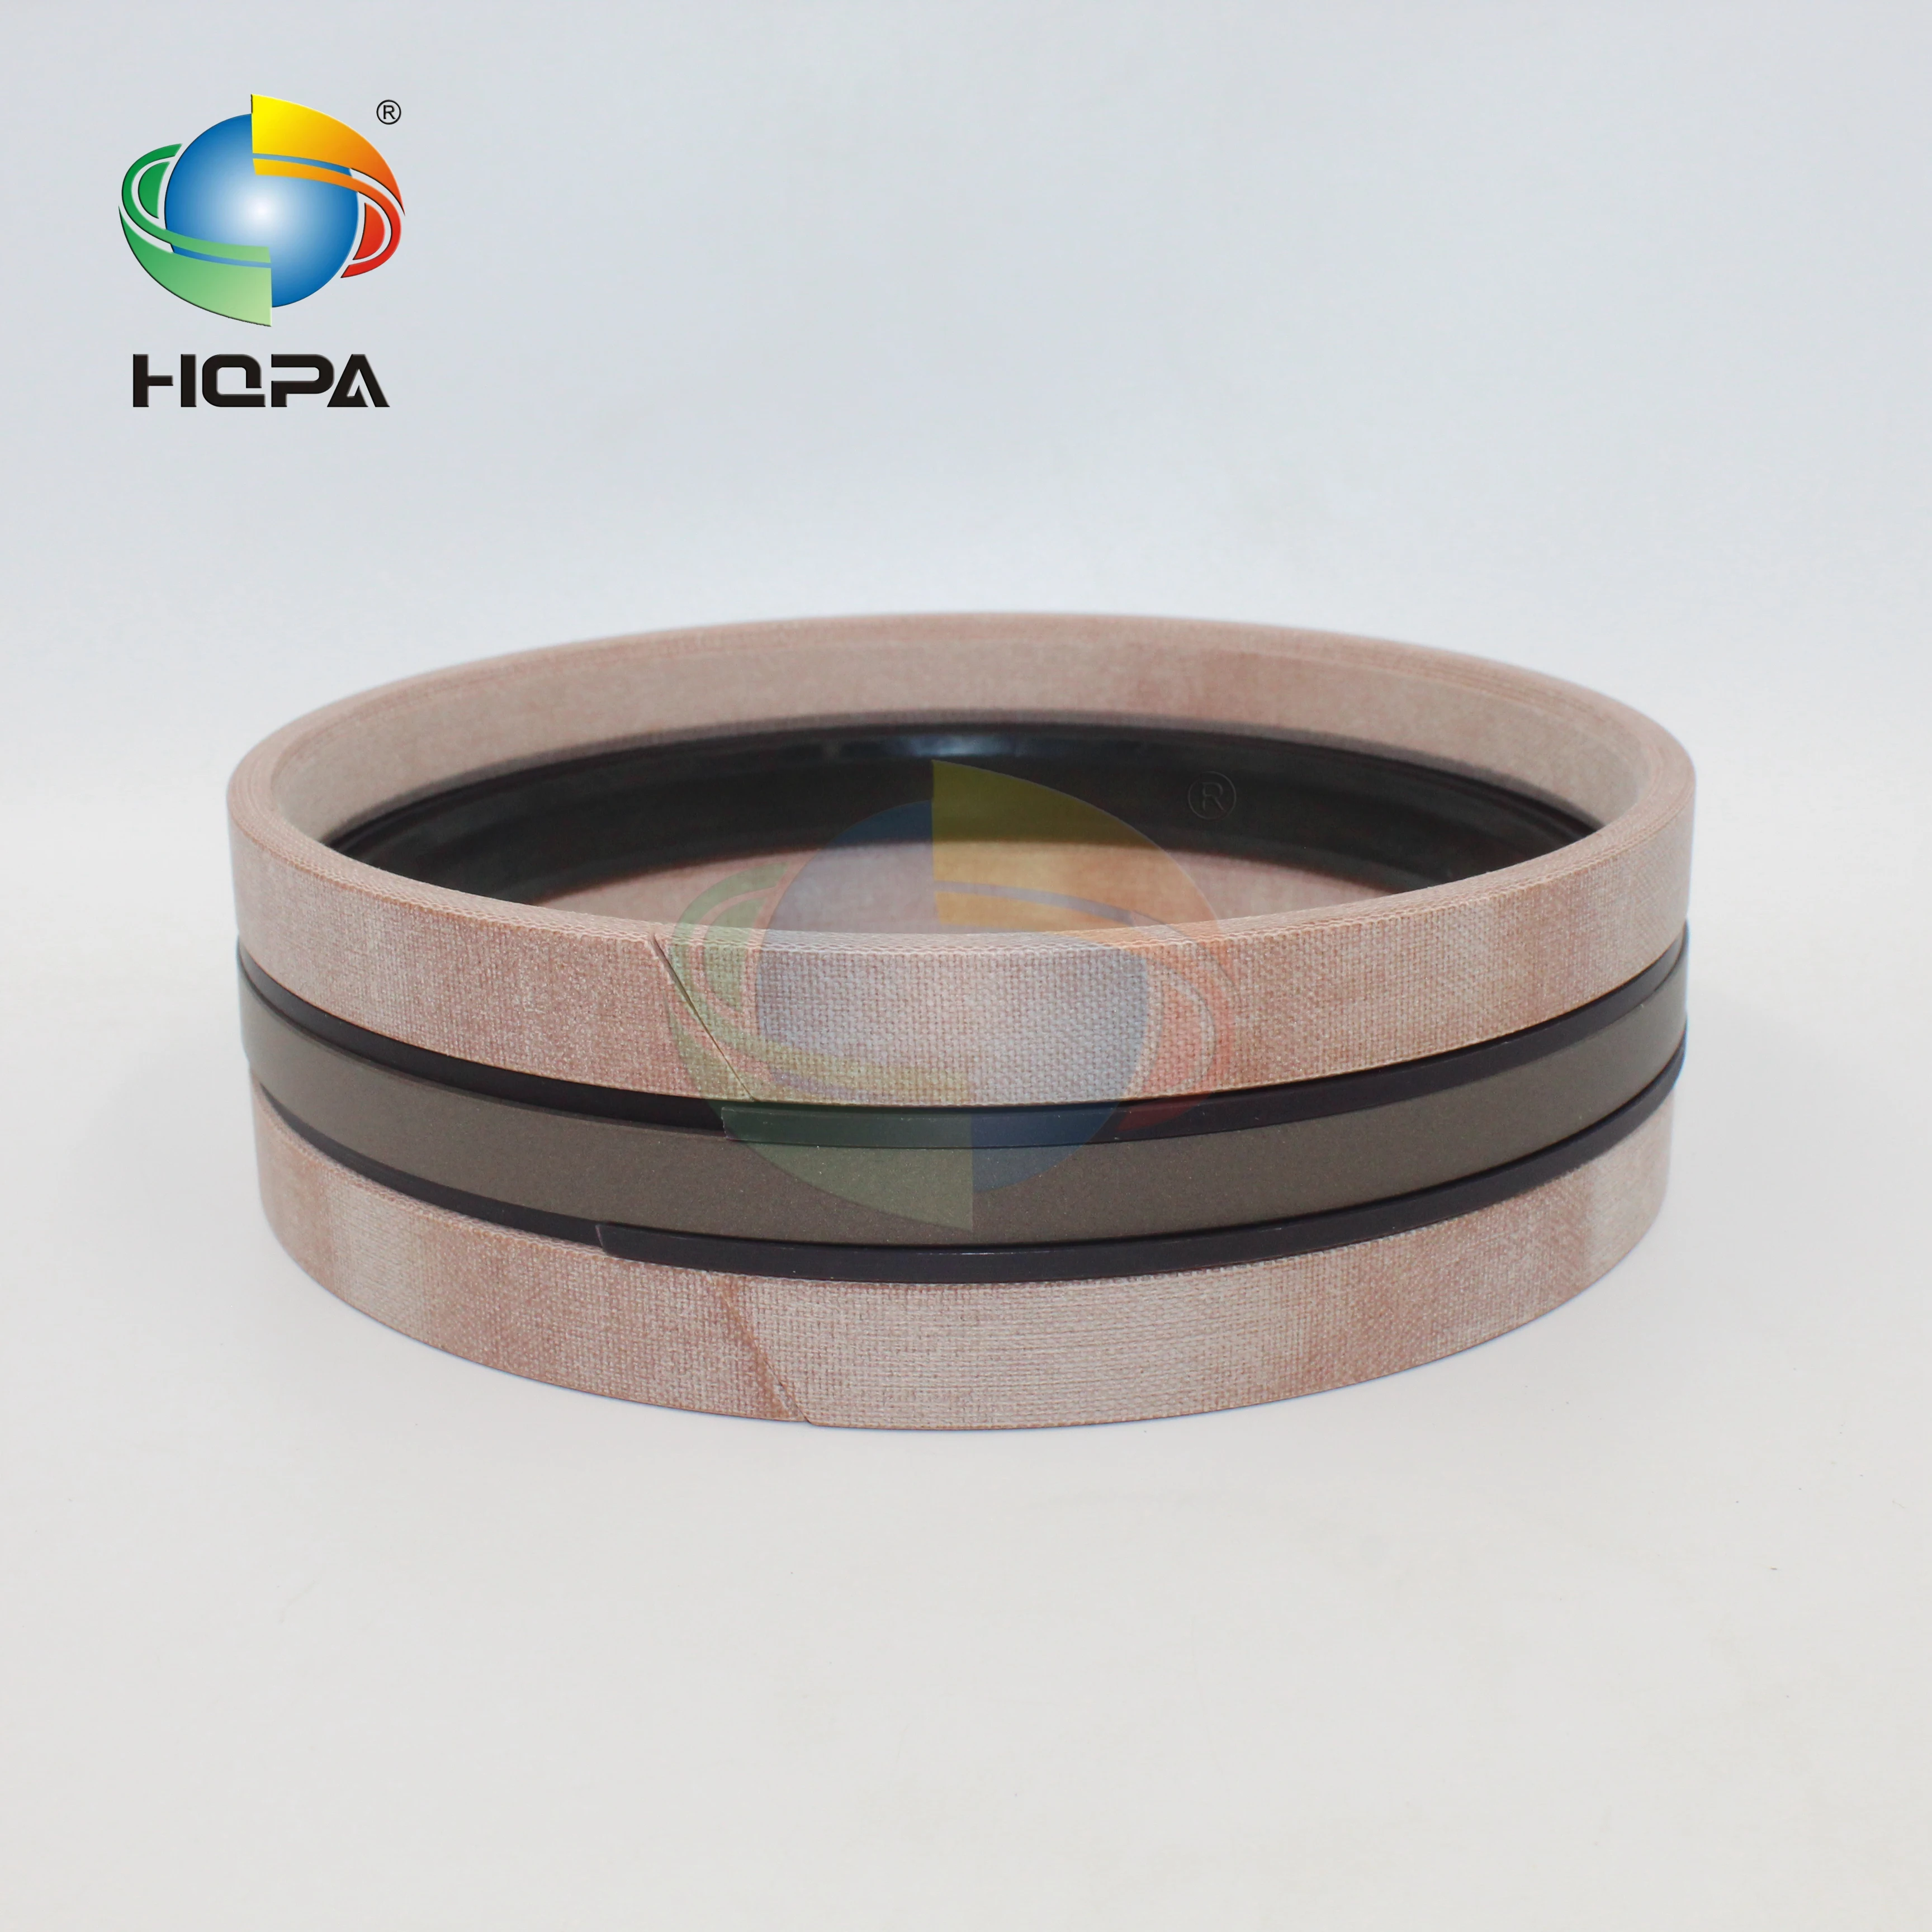 

Hydraulic Oil Seal Ring For KOMATSU PC600LC-6 PC600LC-7 Boom Arm Bucket Cylinder Seal Kit 707-99-68580 707-99-77140 707-99-68560